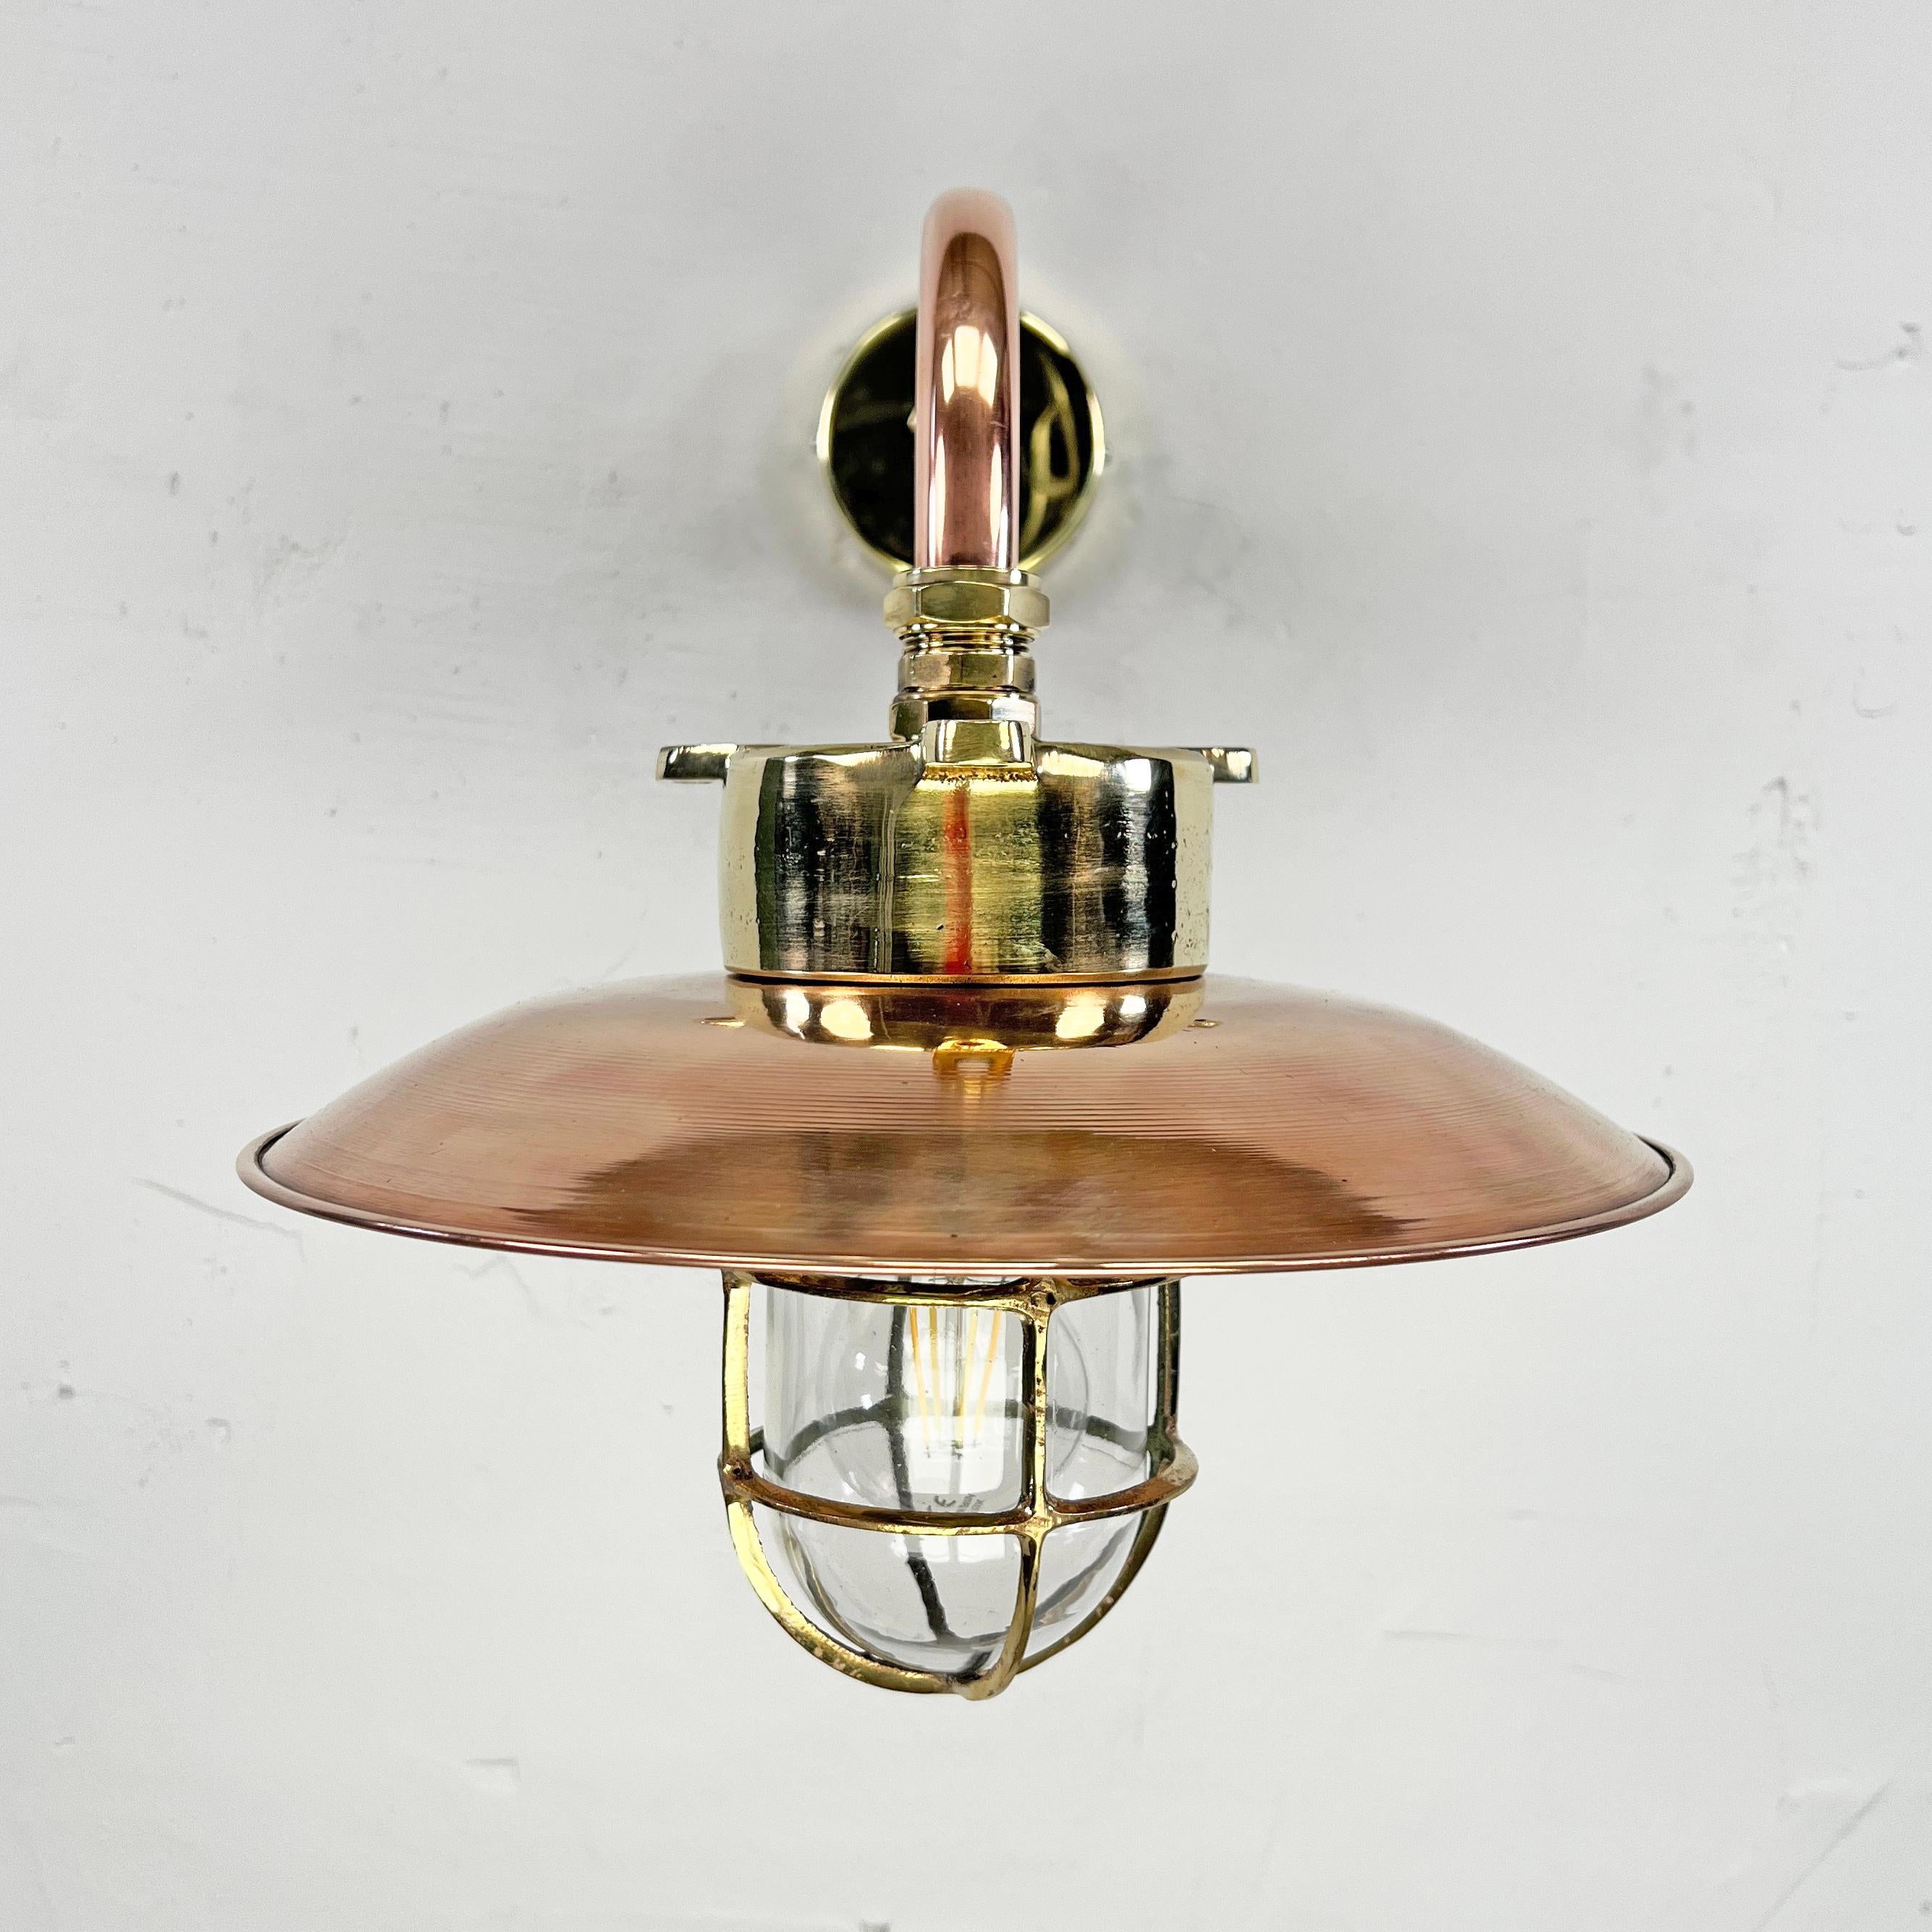 1970s Japanese Cast Brass and Copper Explosion Proof Caged Cantilever Wall Light For Sale 1